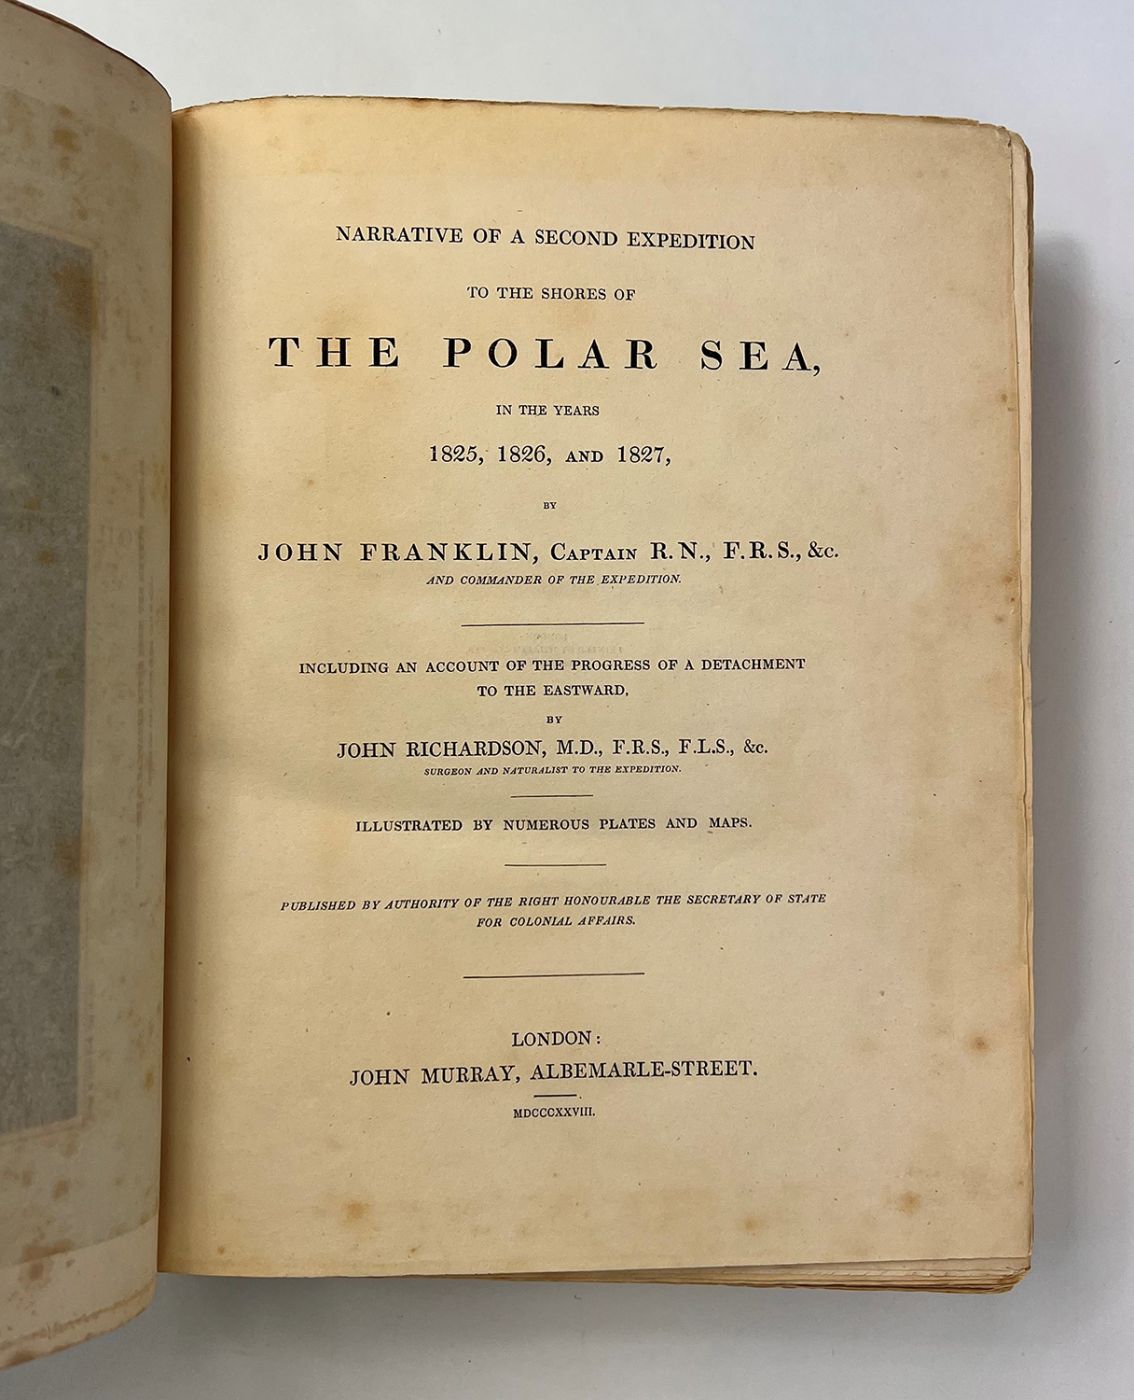 NARRATIVE OF A SECOND EXPEDITION TO THE SHORES OF THE POLAR SEA, IN THE YEARS 1825, 1826, AND 1827, -  image 4